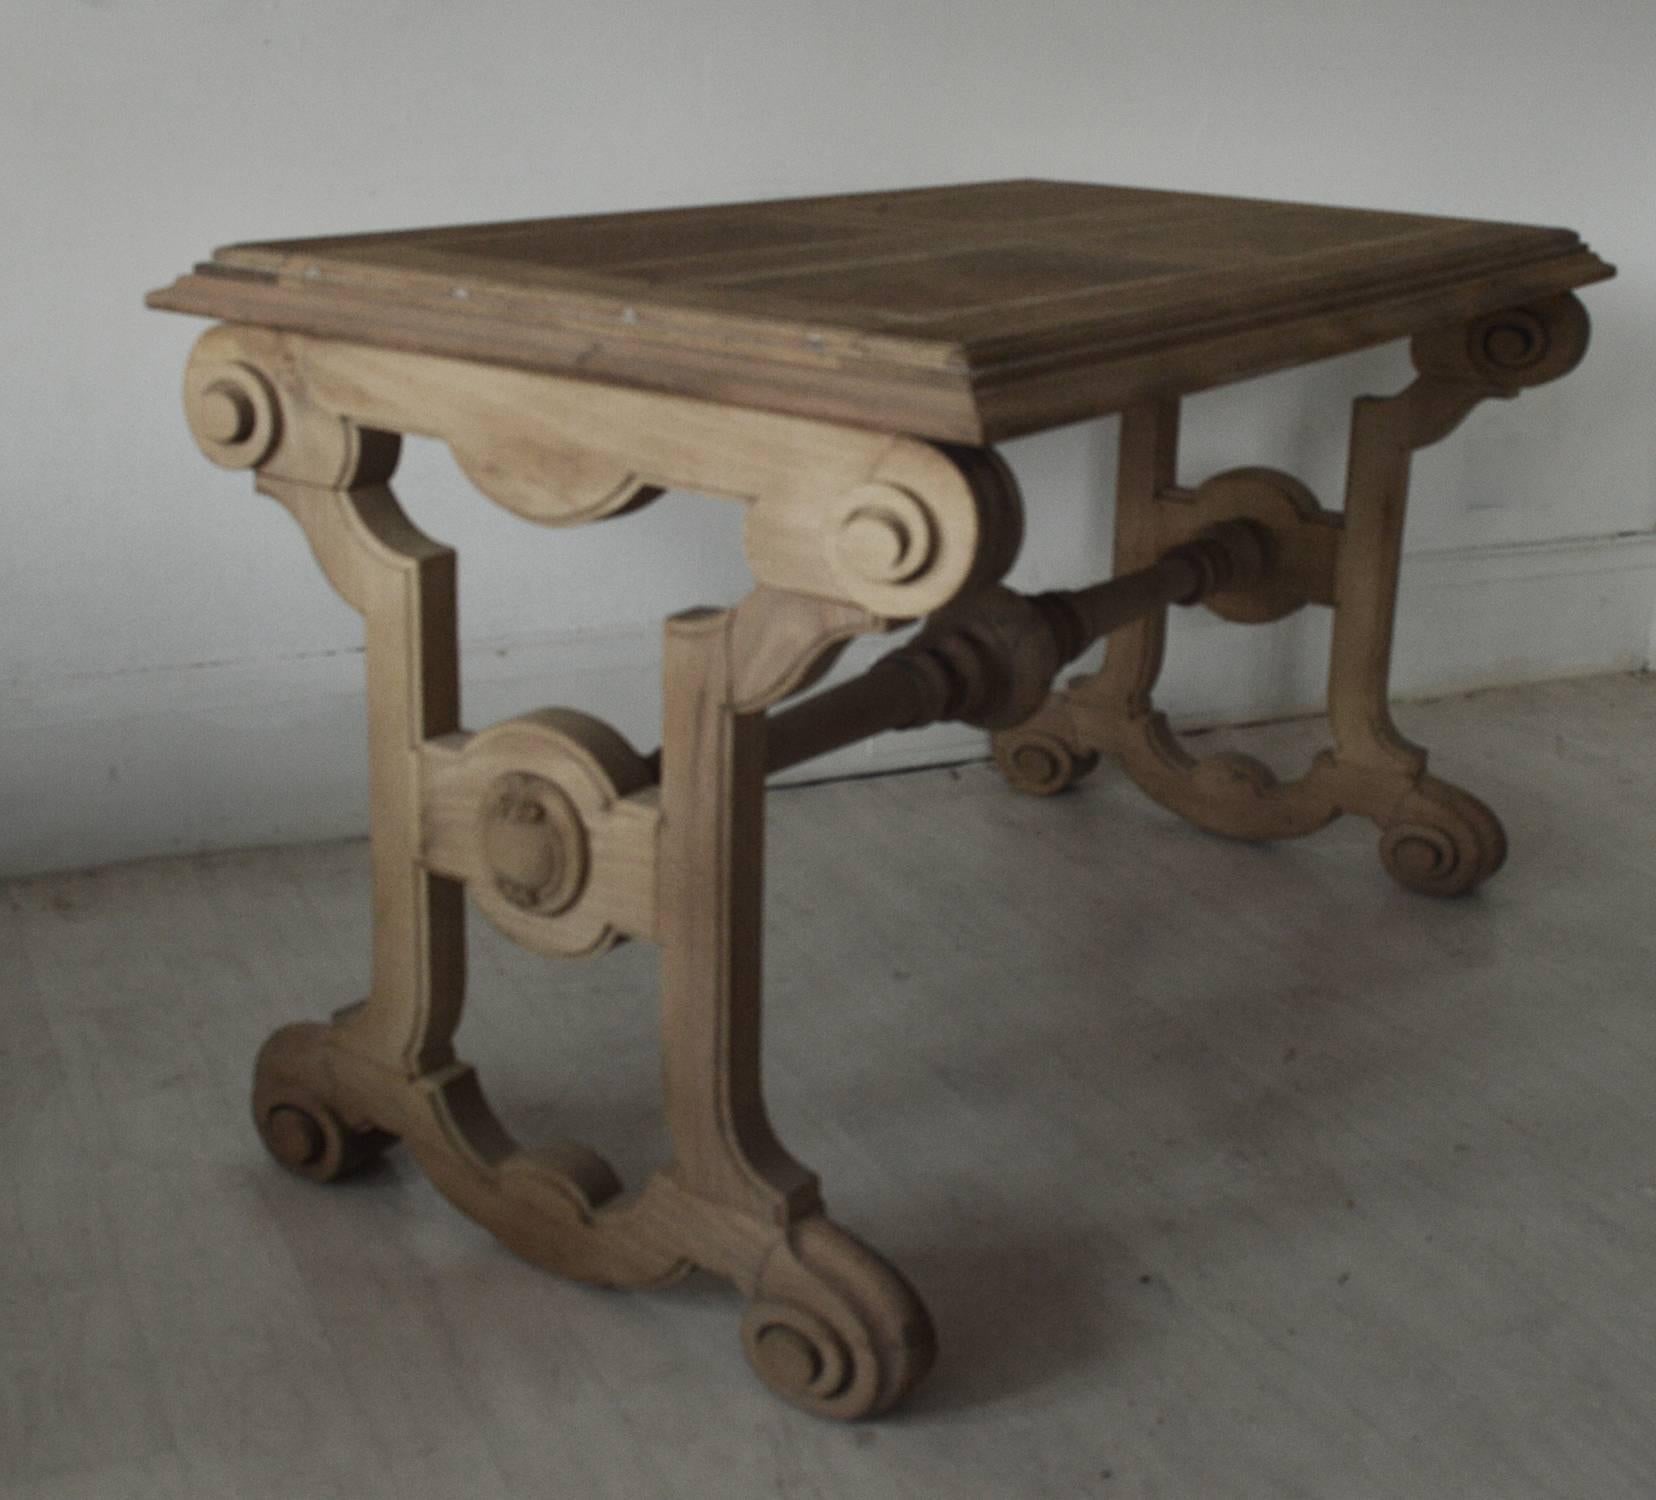 Wonderful architectural library table or desk / console table.

It is free standing or used against a wall.

Beautiful carved and turned walnut. The piece has been stripped back and slightly bleached to reveal the fabulous grain in the wood. The